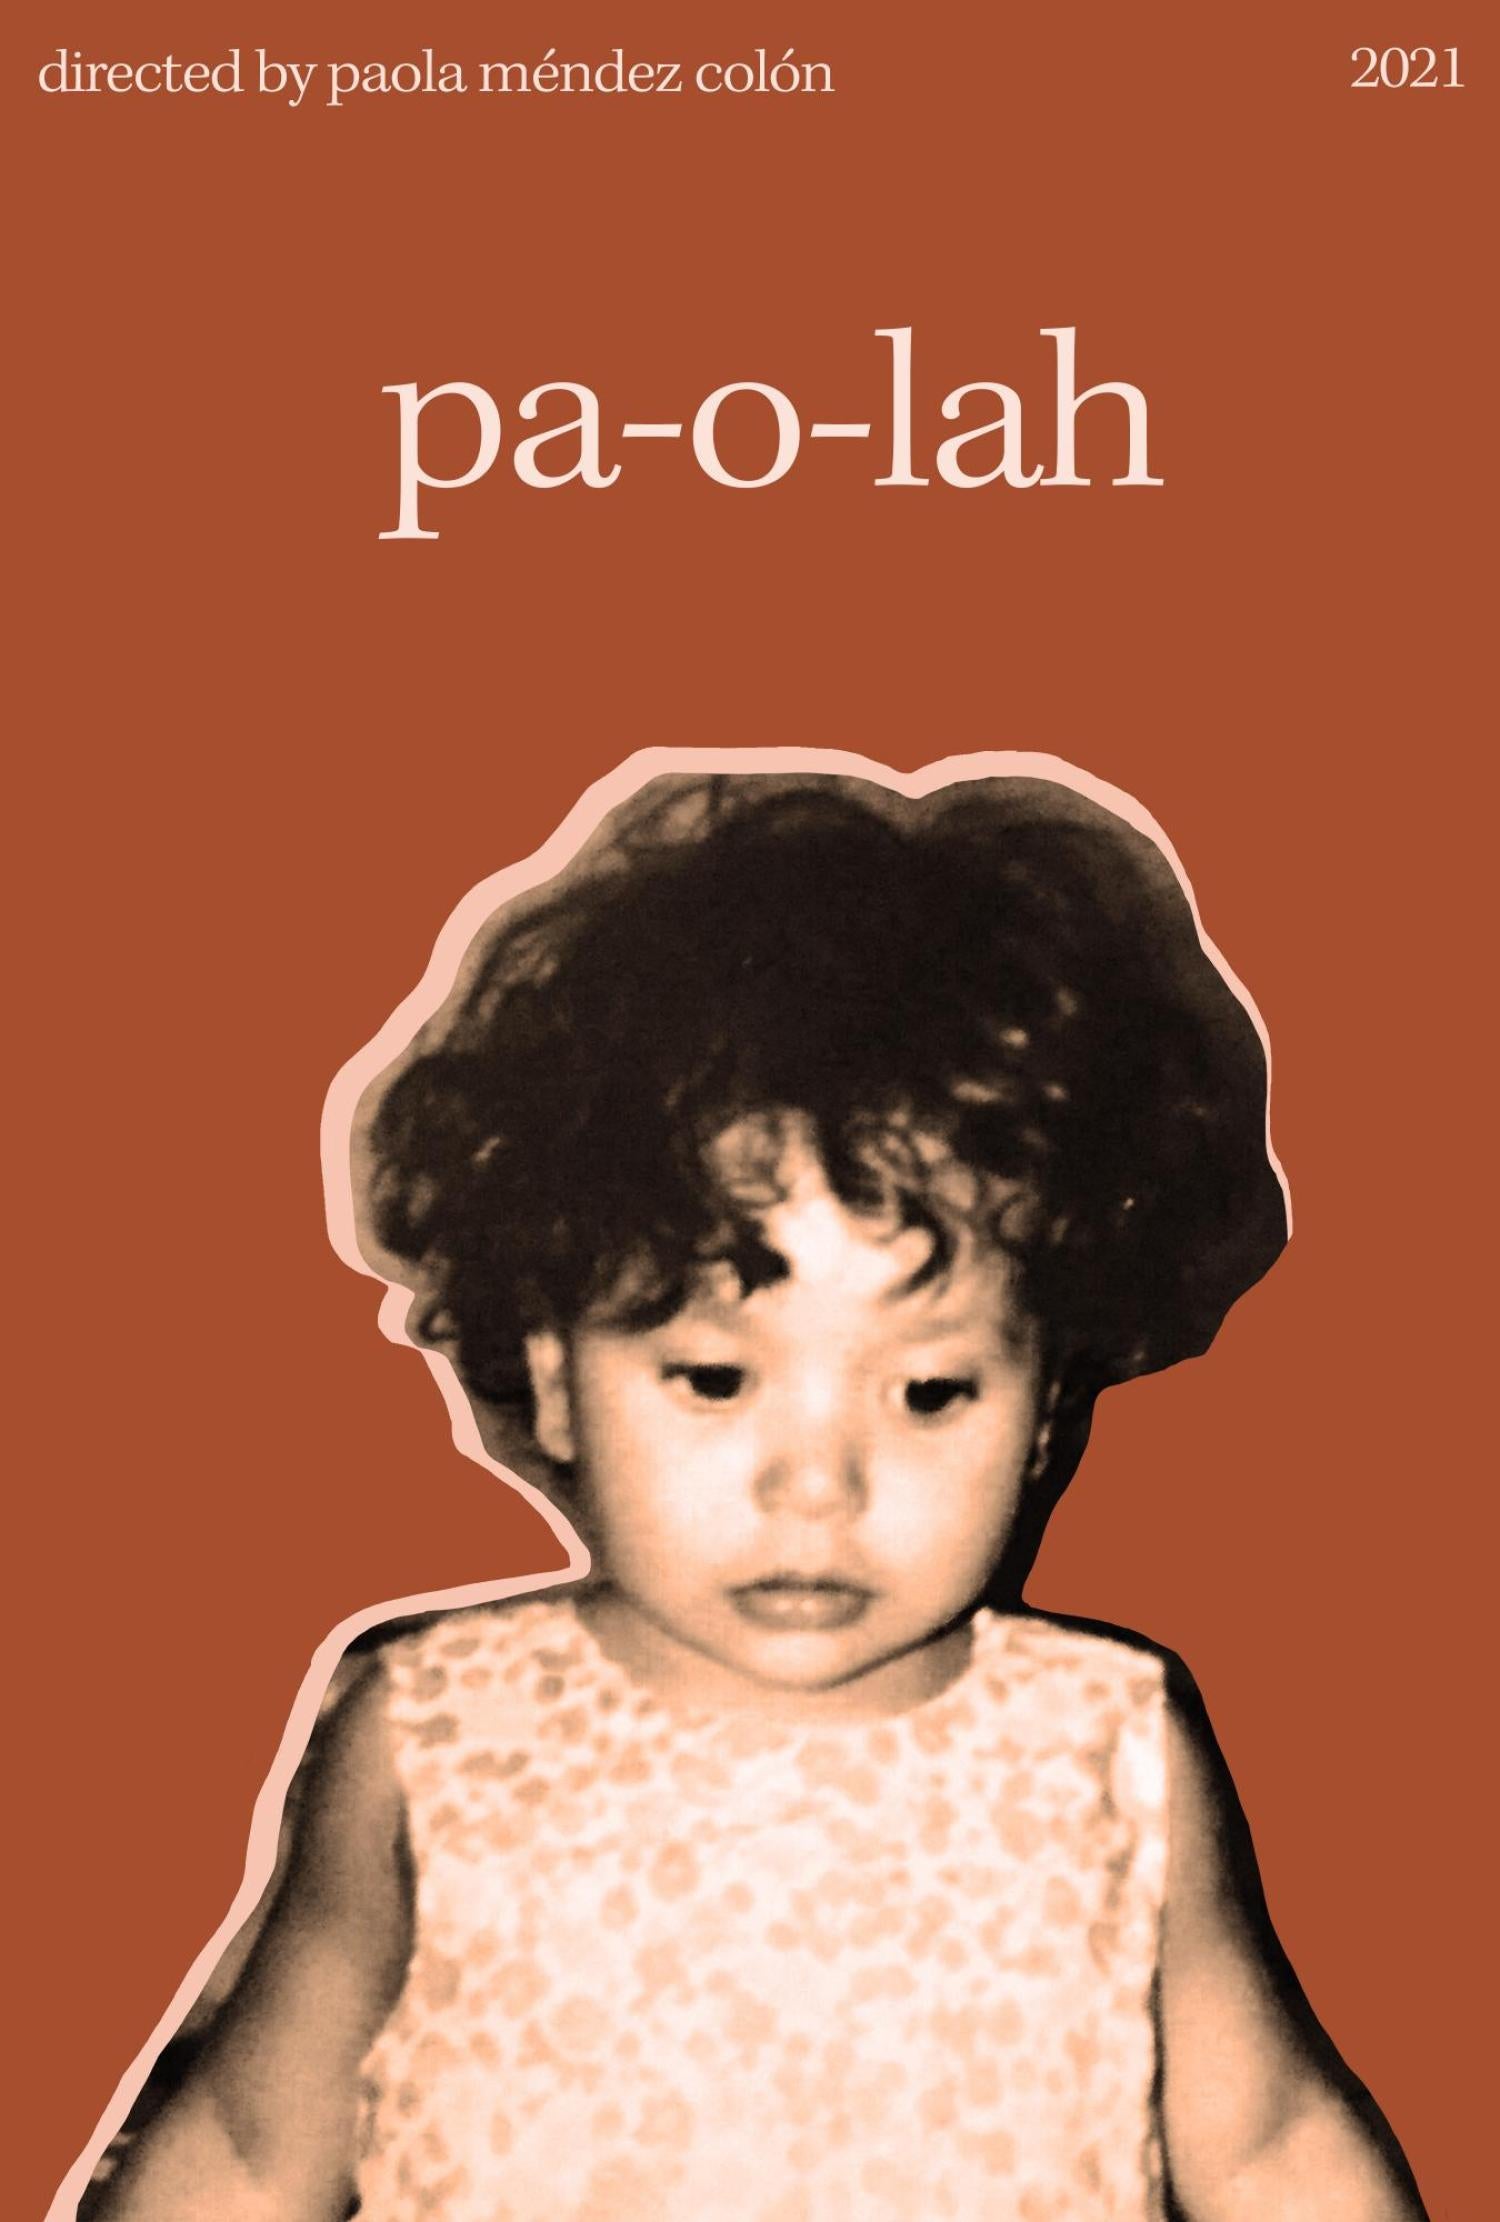 Movie poster with cut-out photo of artist as toddler pasted against a brunt orange background with title pa-o-lah